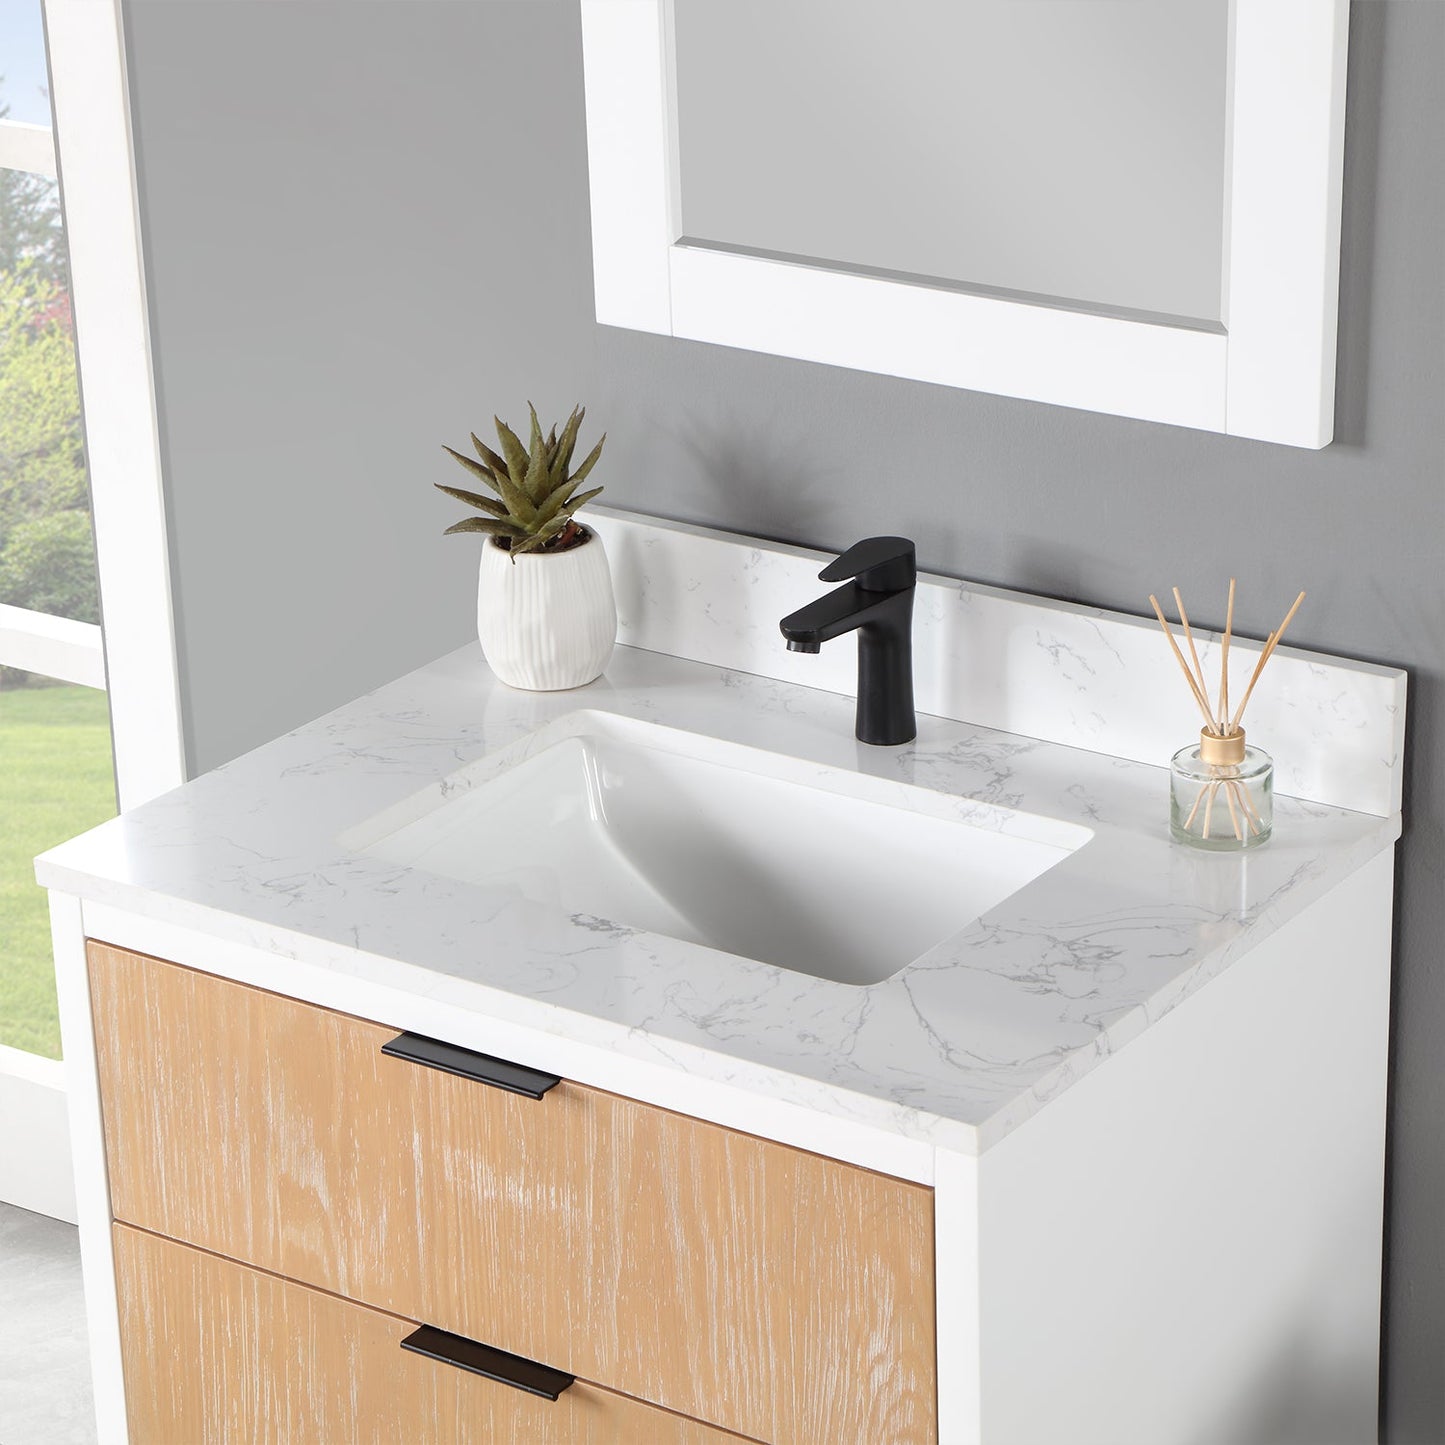 Dione 30" Single Bathroom Vanity in Weathered Pine with Carrara White Composite Stone Countertop with Mirror